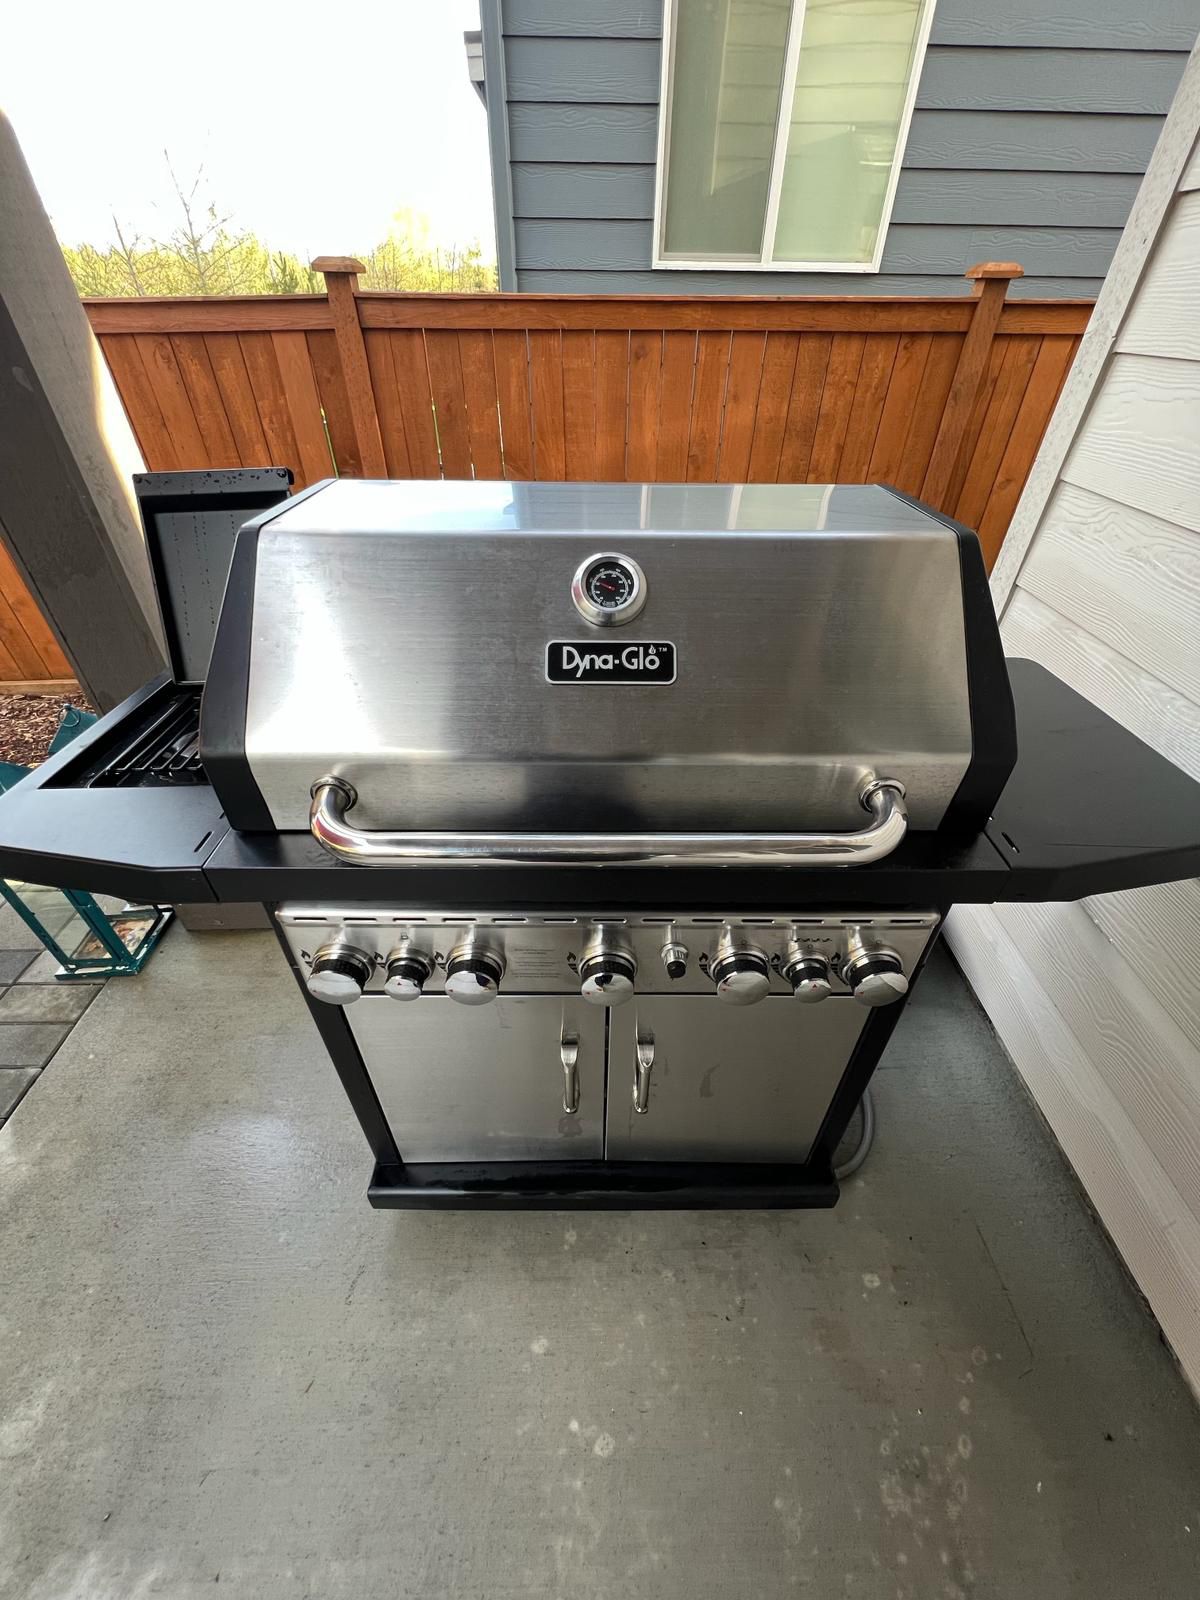 Dyna-Glo Black & Stainless Premium Grills, 5 Burner, Natural Gas(NOT PROPANE)